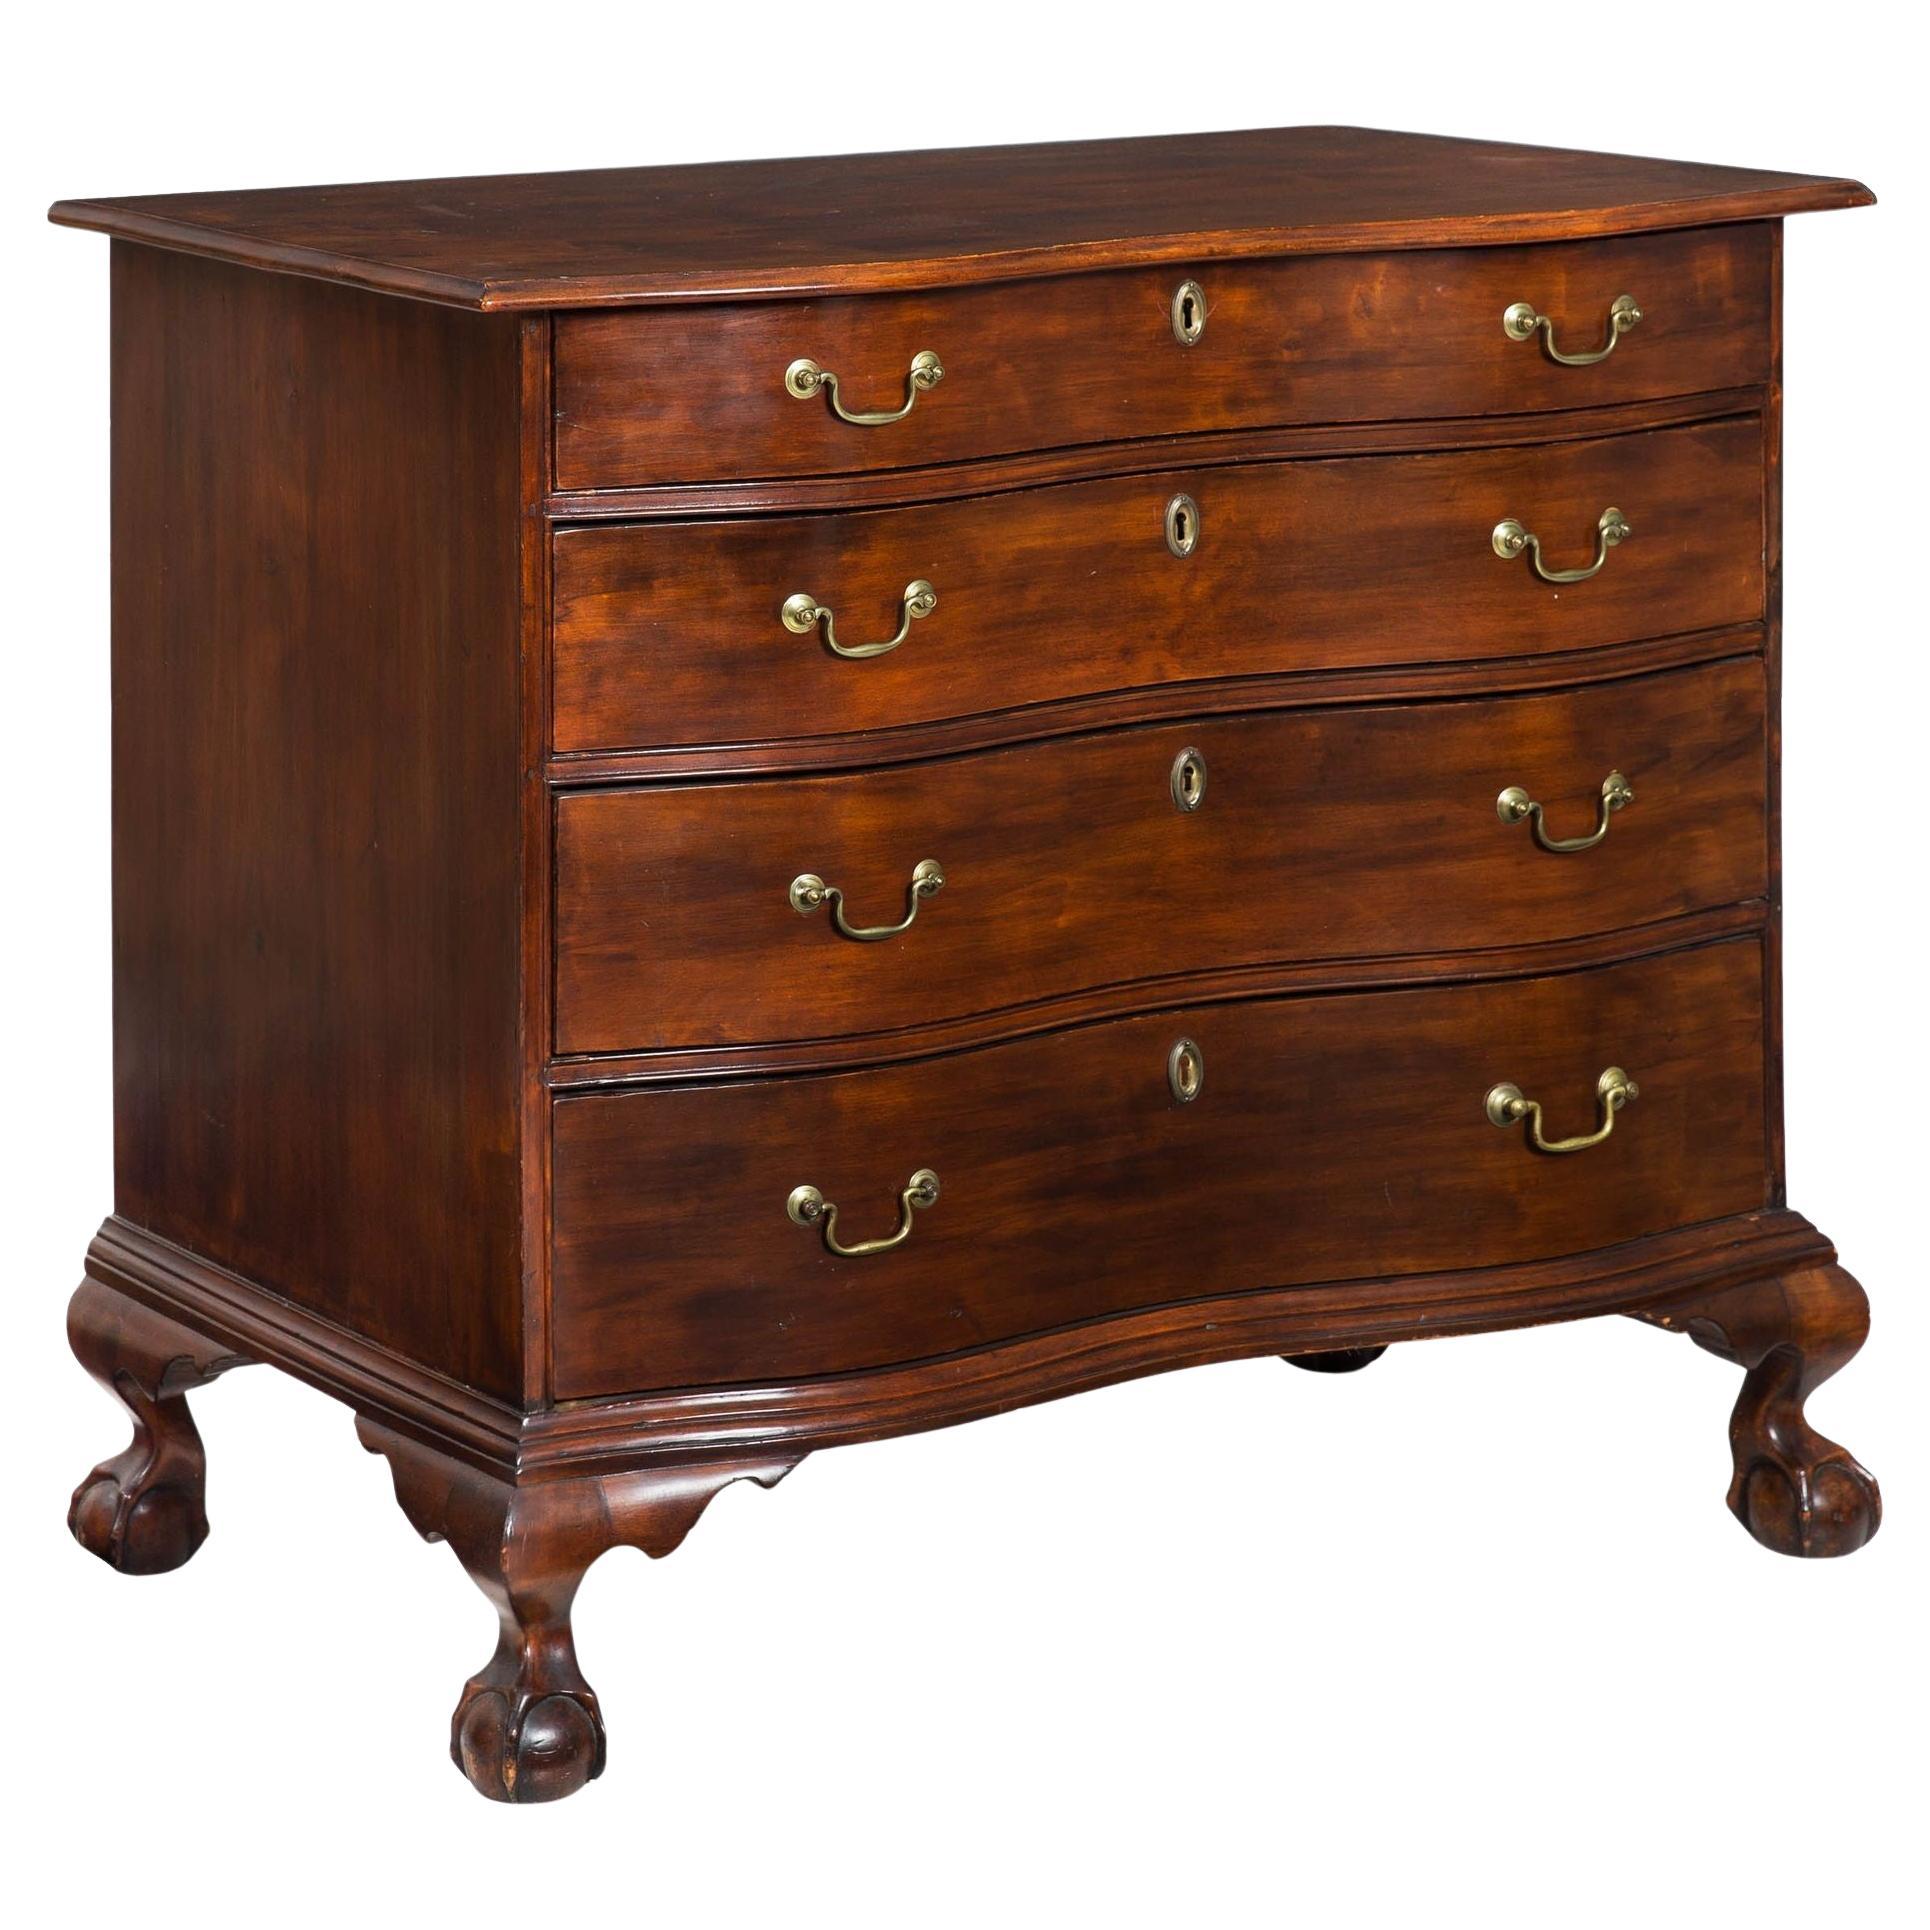 American Chippendale Birchwood Serpentine Chest of Drawers, circa 1770